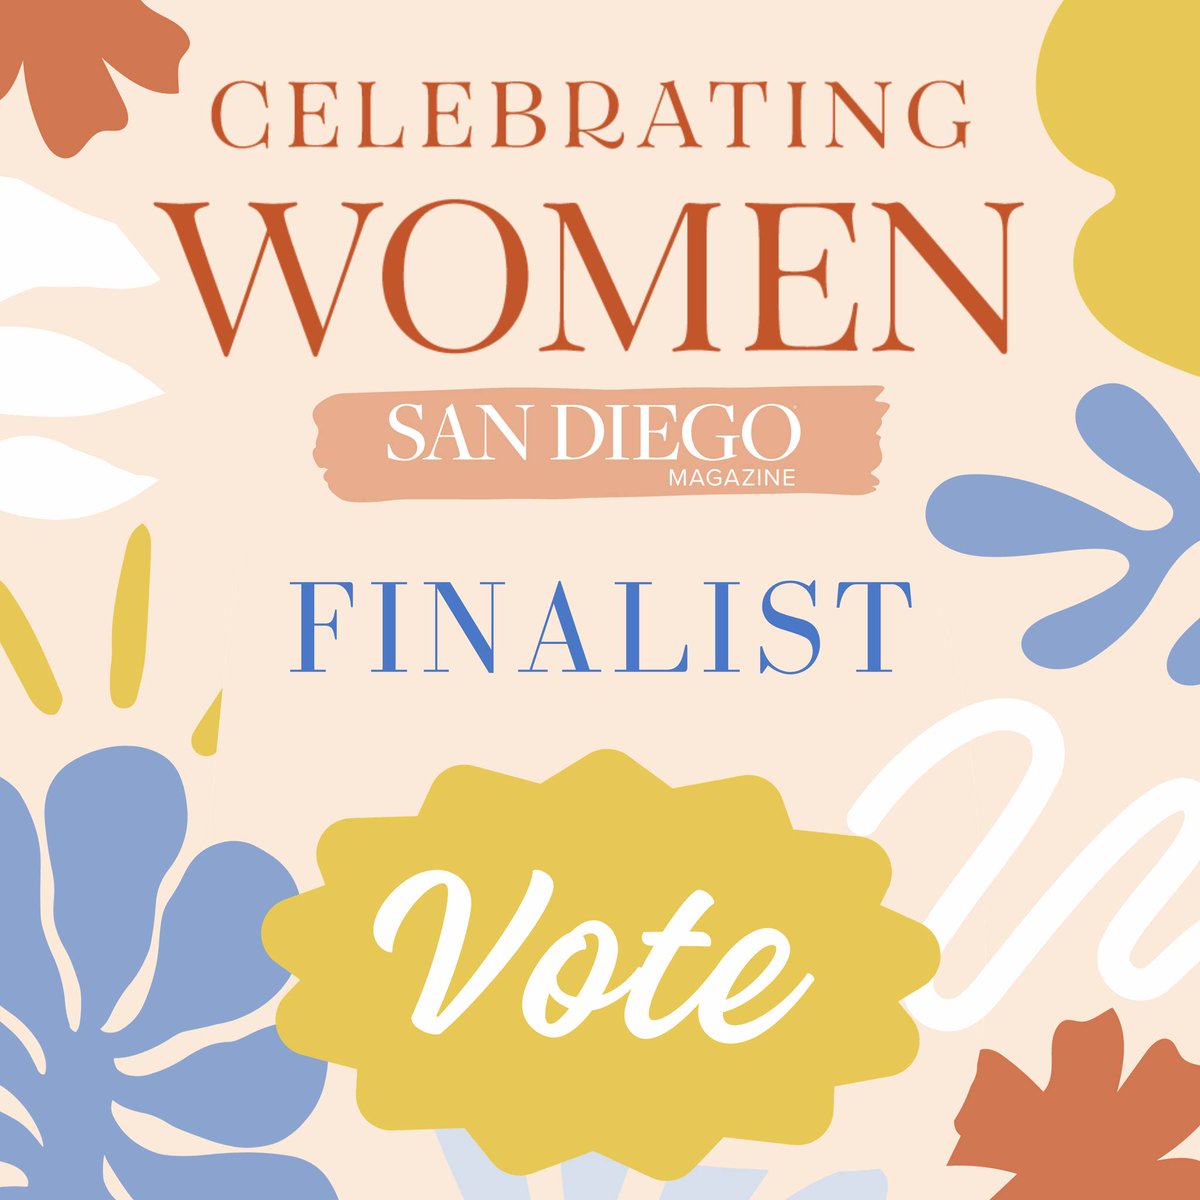 🤩We're excited to share that @OrlyLobel, Warren Distinguished Professor of Law, has been nominated as a Law + Legal - Pioneer finalist for @SanDiegoMag Celebrating Women Awards! 🗳Vote now for the People's Choice awards by Oct. 9. sandiegomagazine.secondstreetapp.com/Celebrating-Wo…